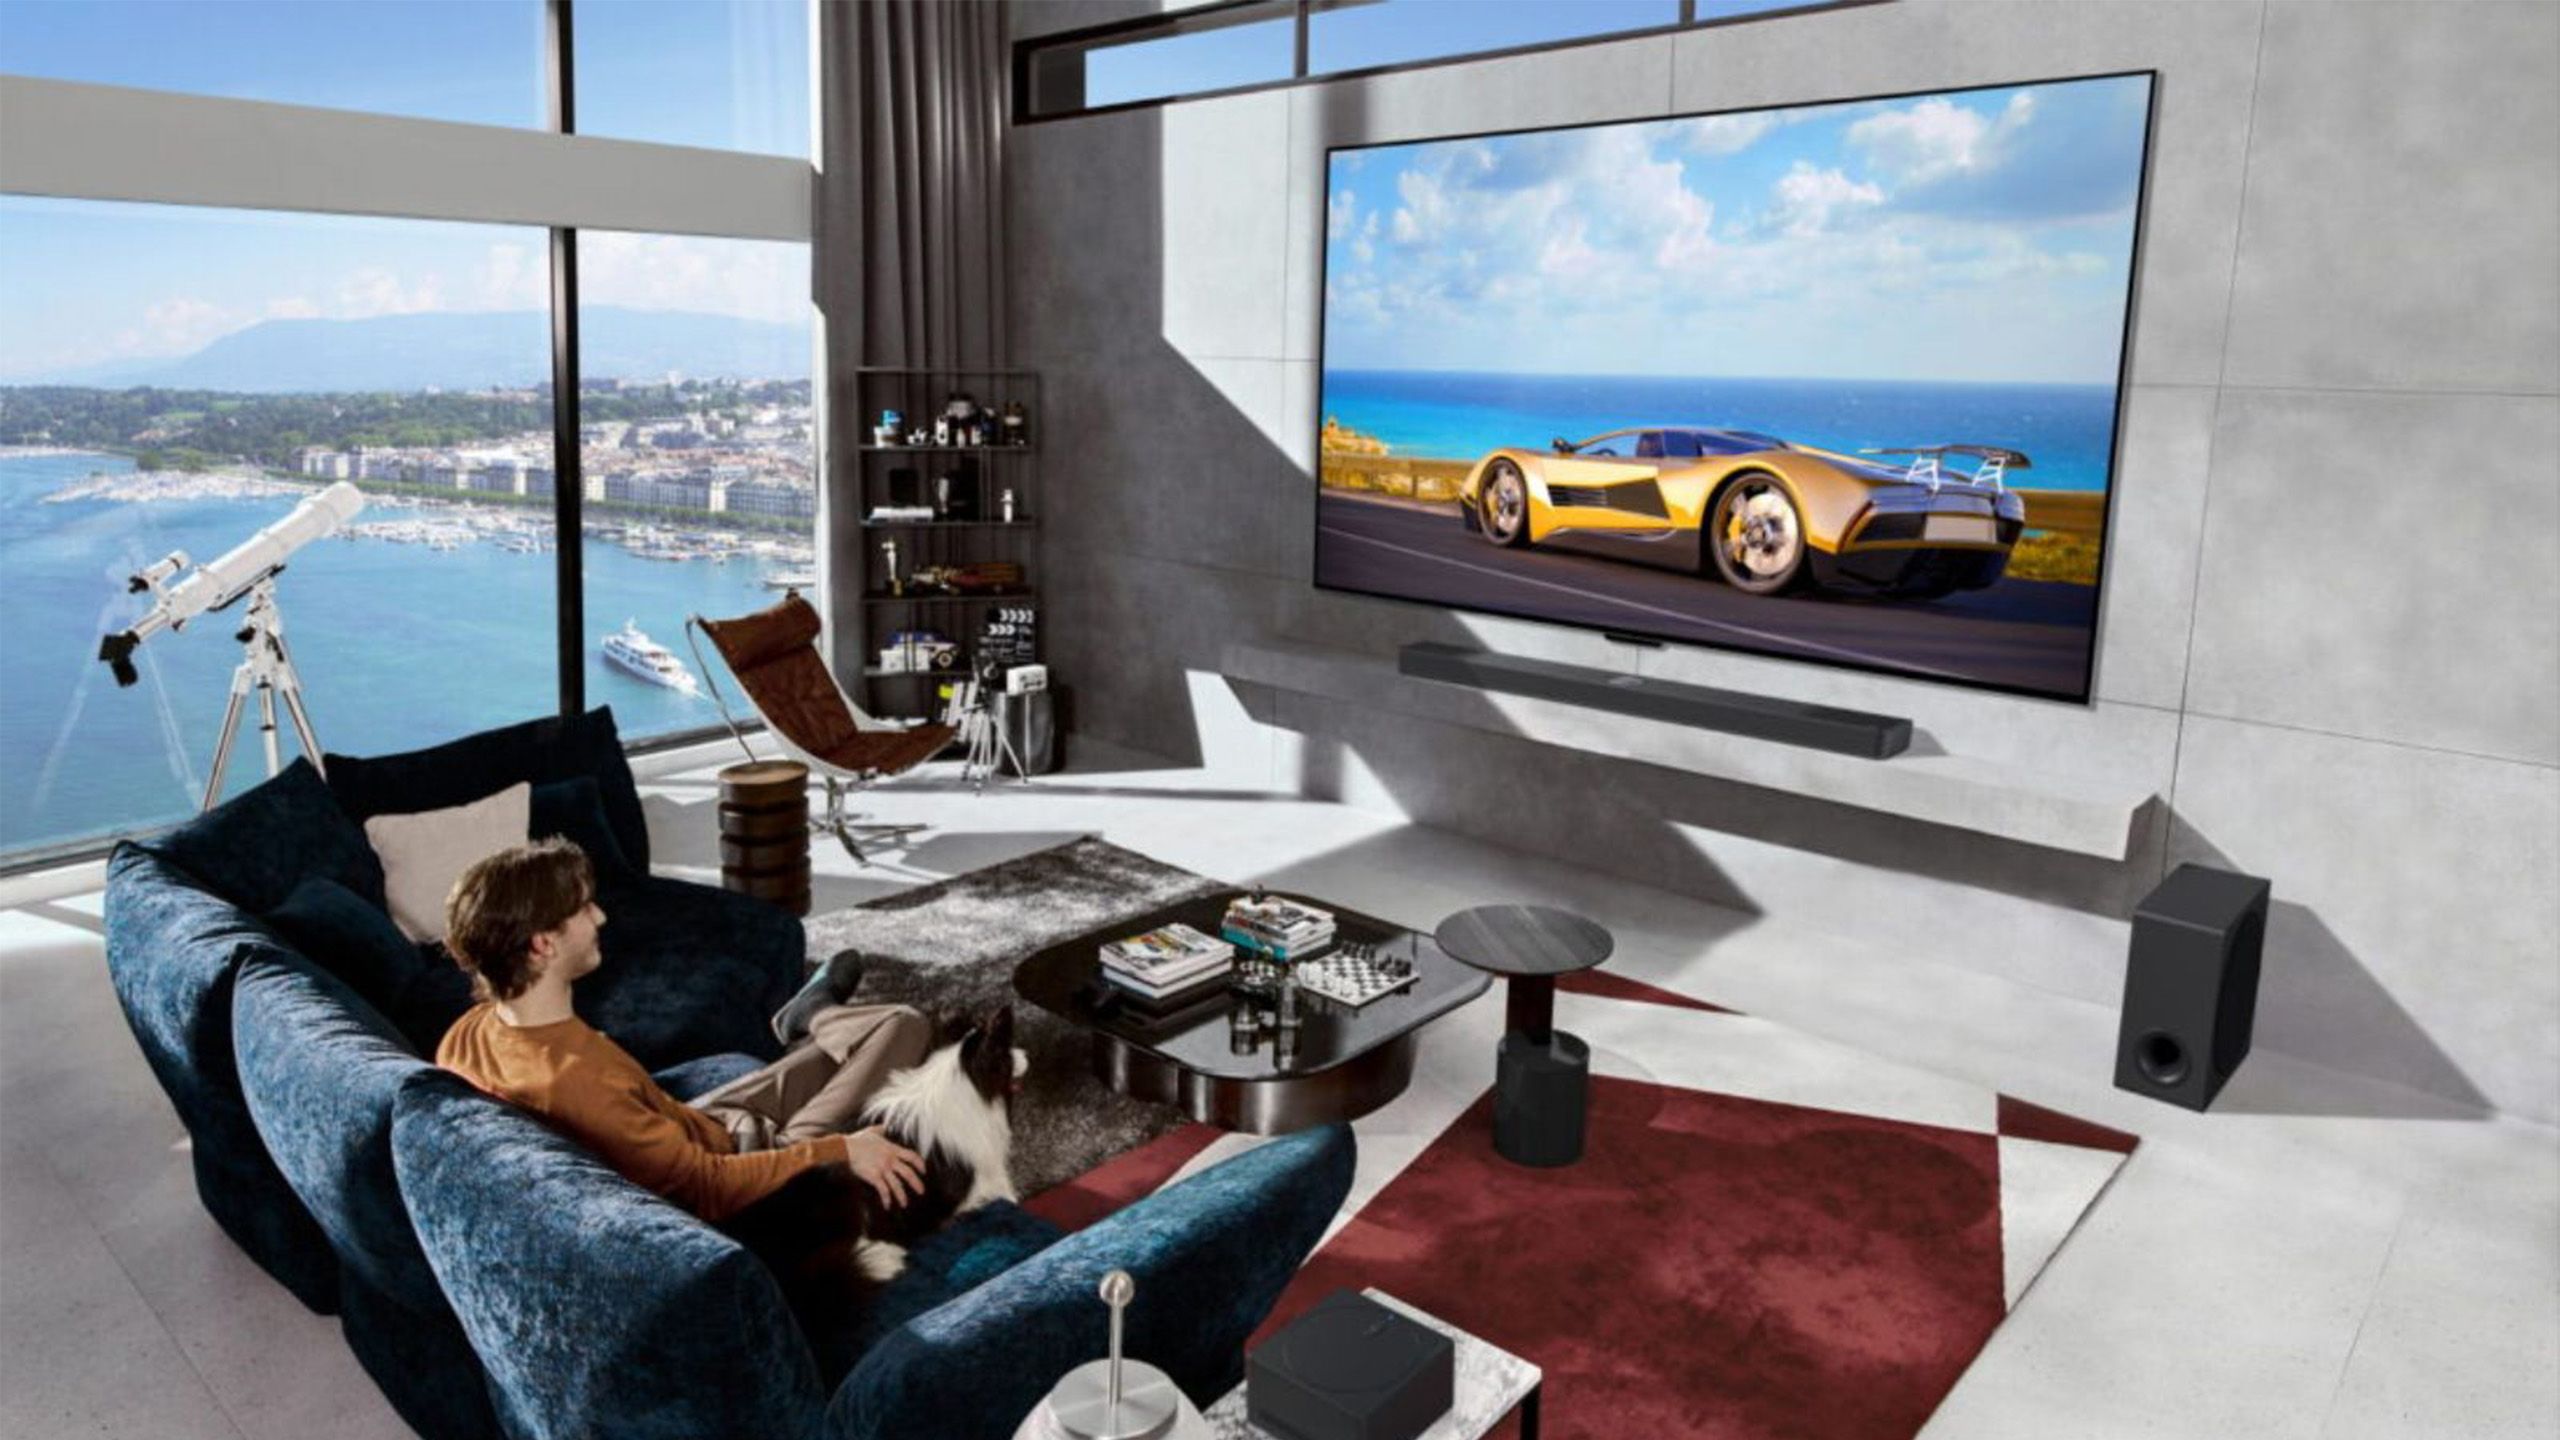 TCL is bringing its 115-inch TV to North America